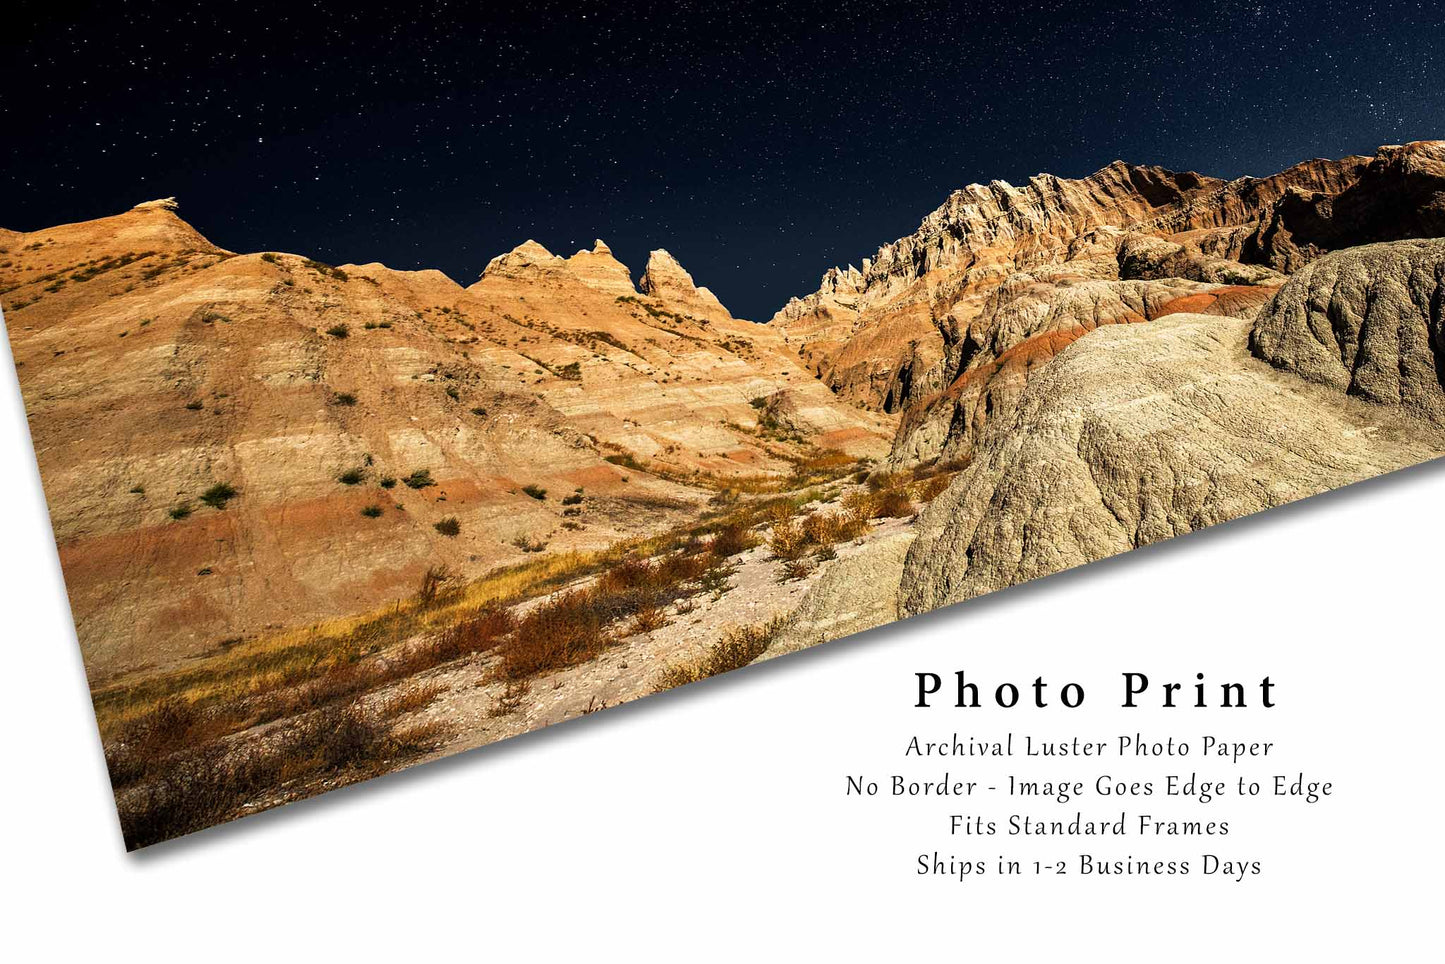 Great Plains Photography Print (Not Framed) Picture of Starry Night Sky Over Pinnacles in Badlands National Park South Dakota Western Wall Art Nature Decor